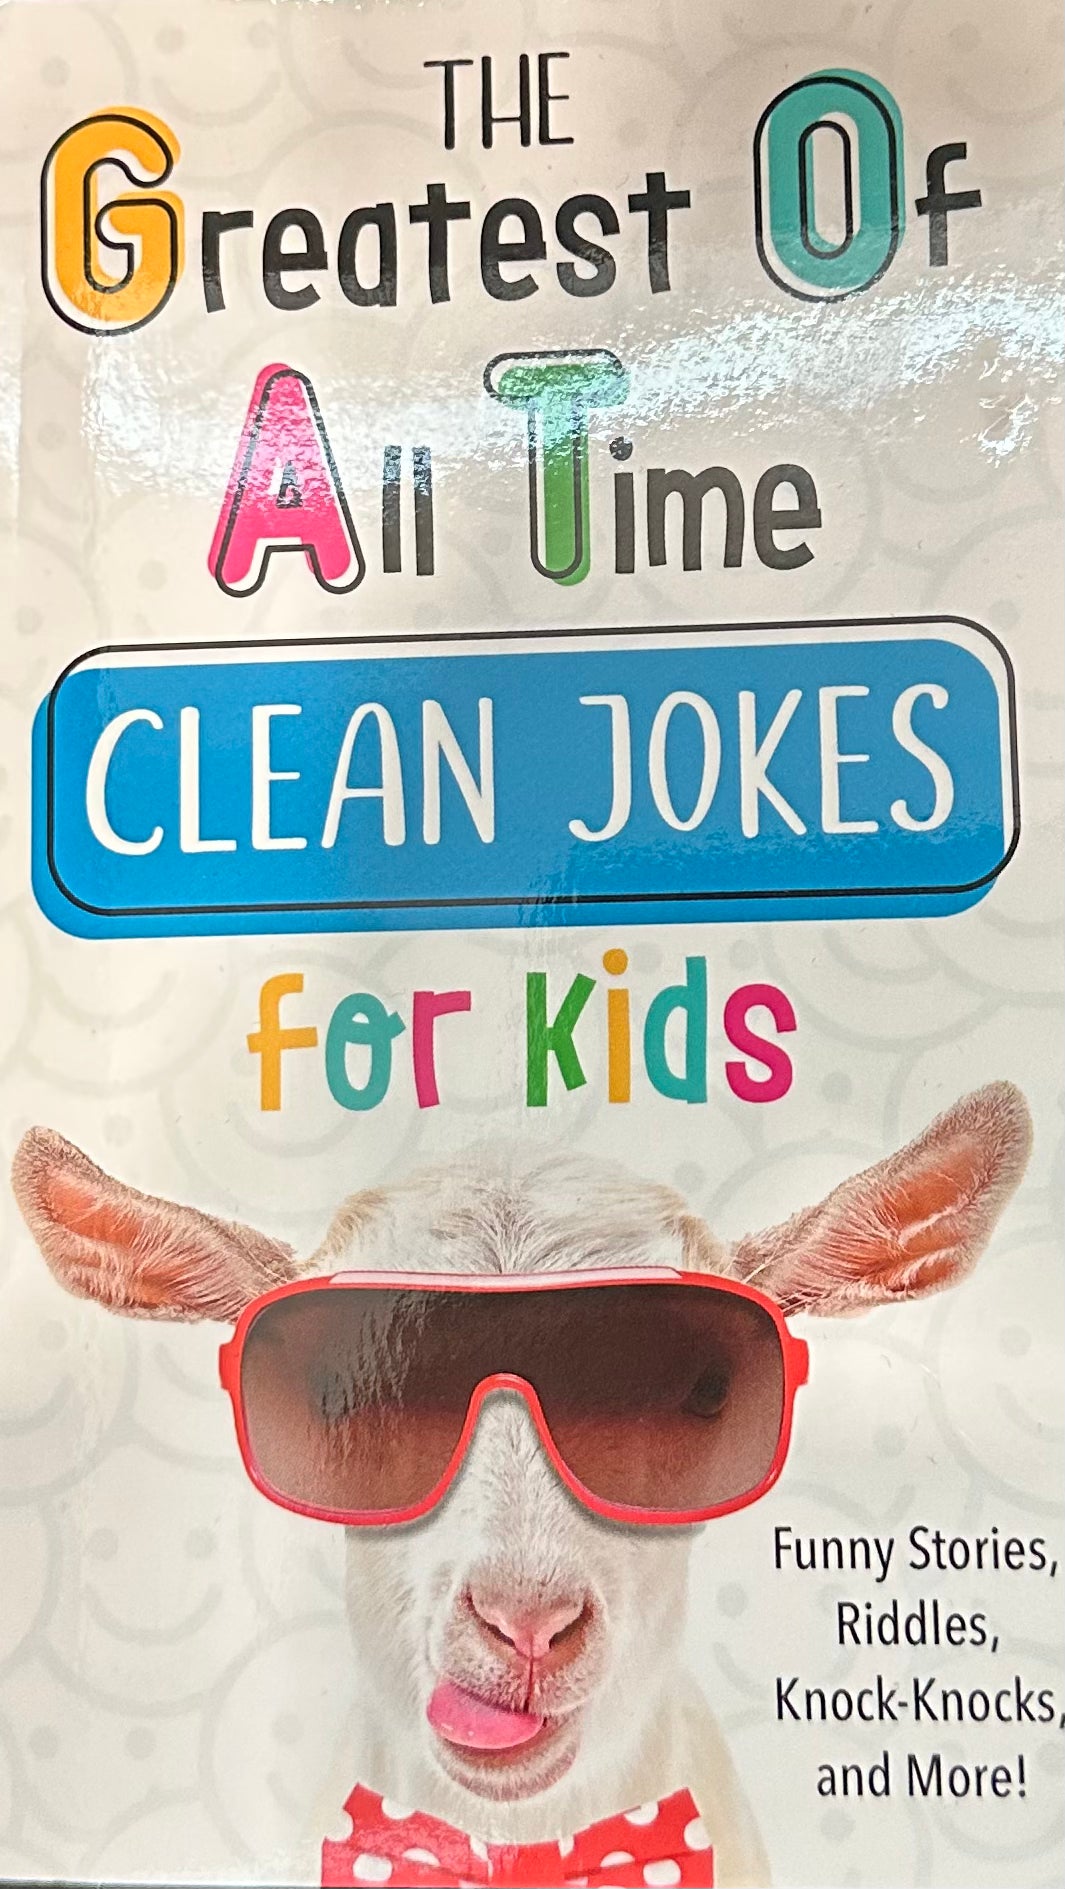 The Greatest of all time Clean Jokes for Kids